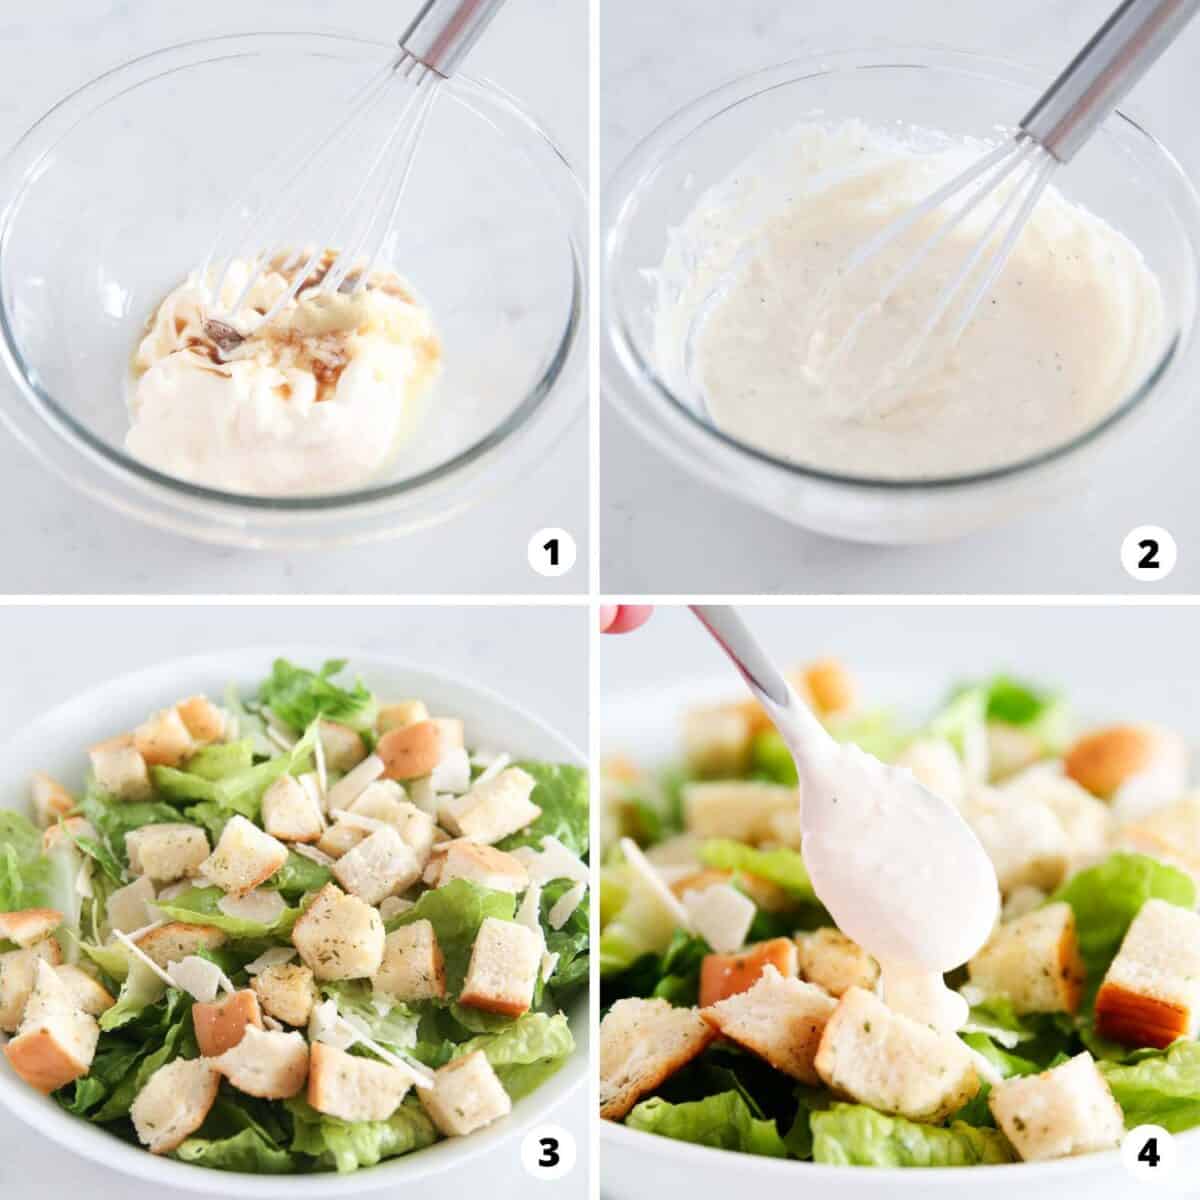 Showing how to make caesar salad dressing in a 4 step collage.